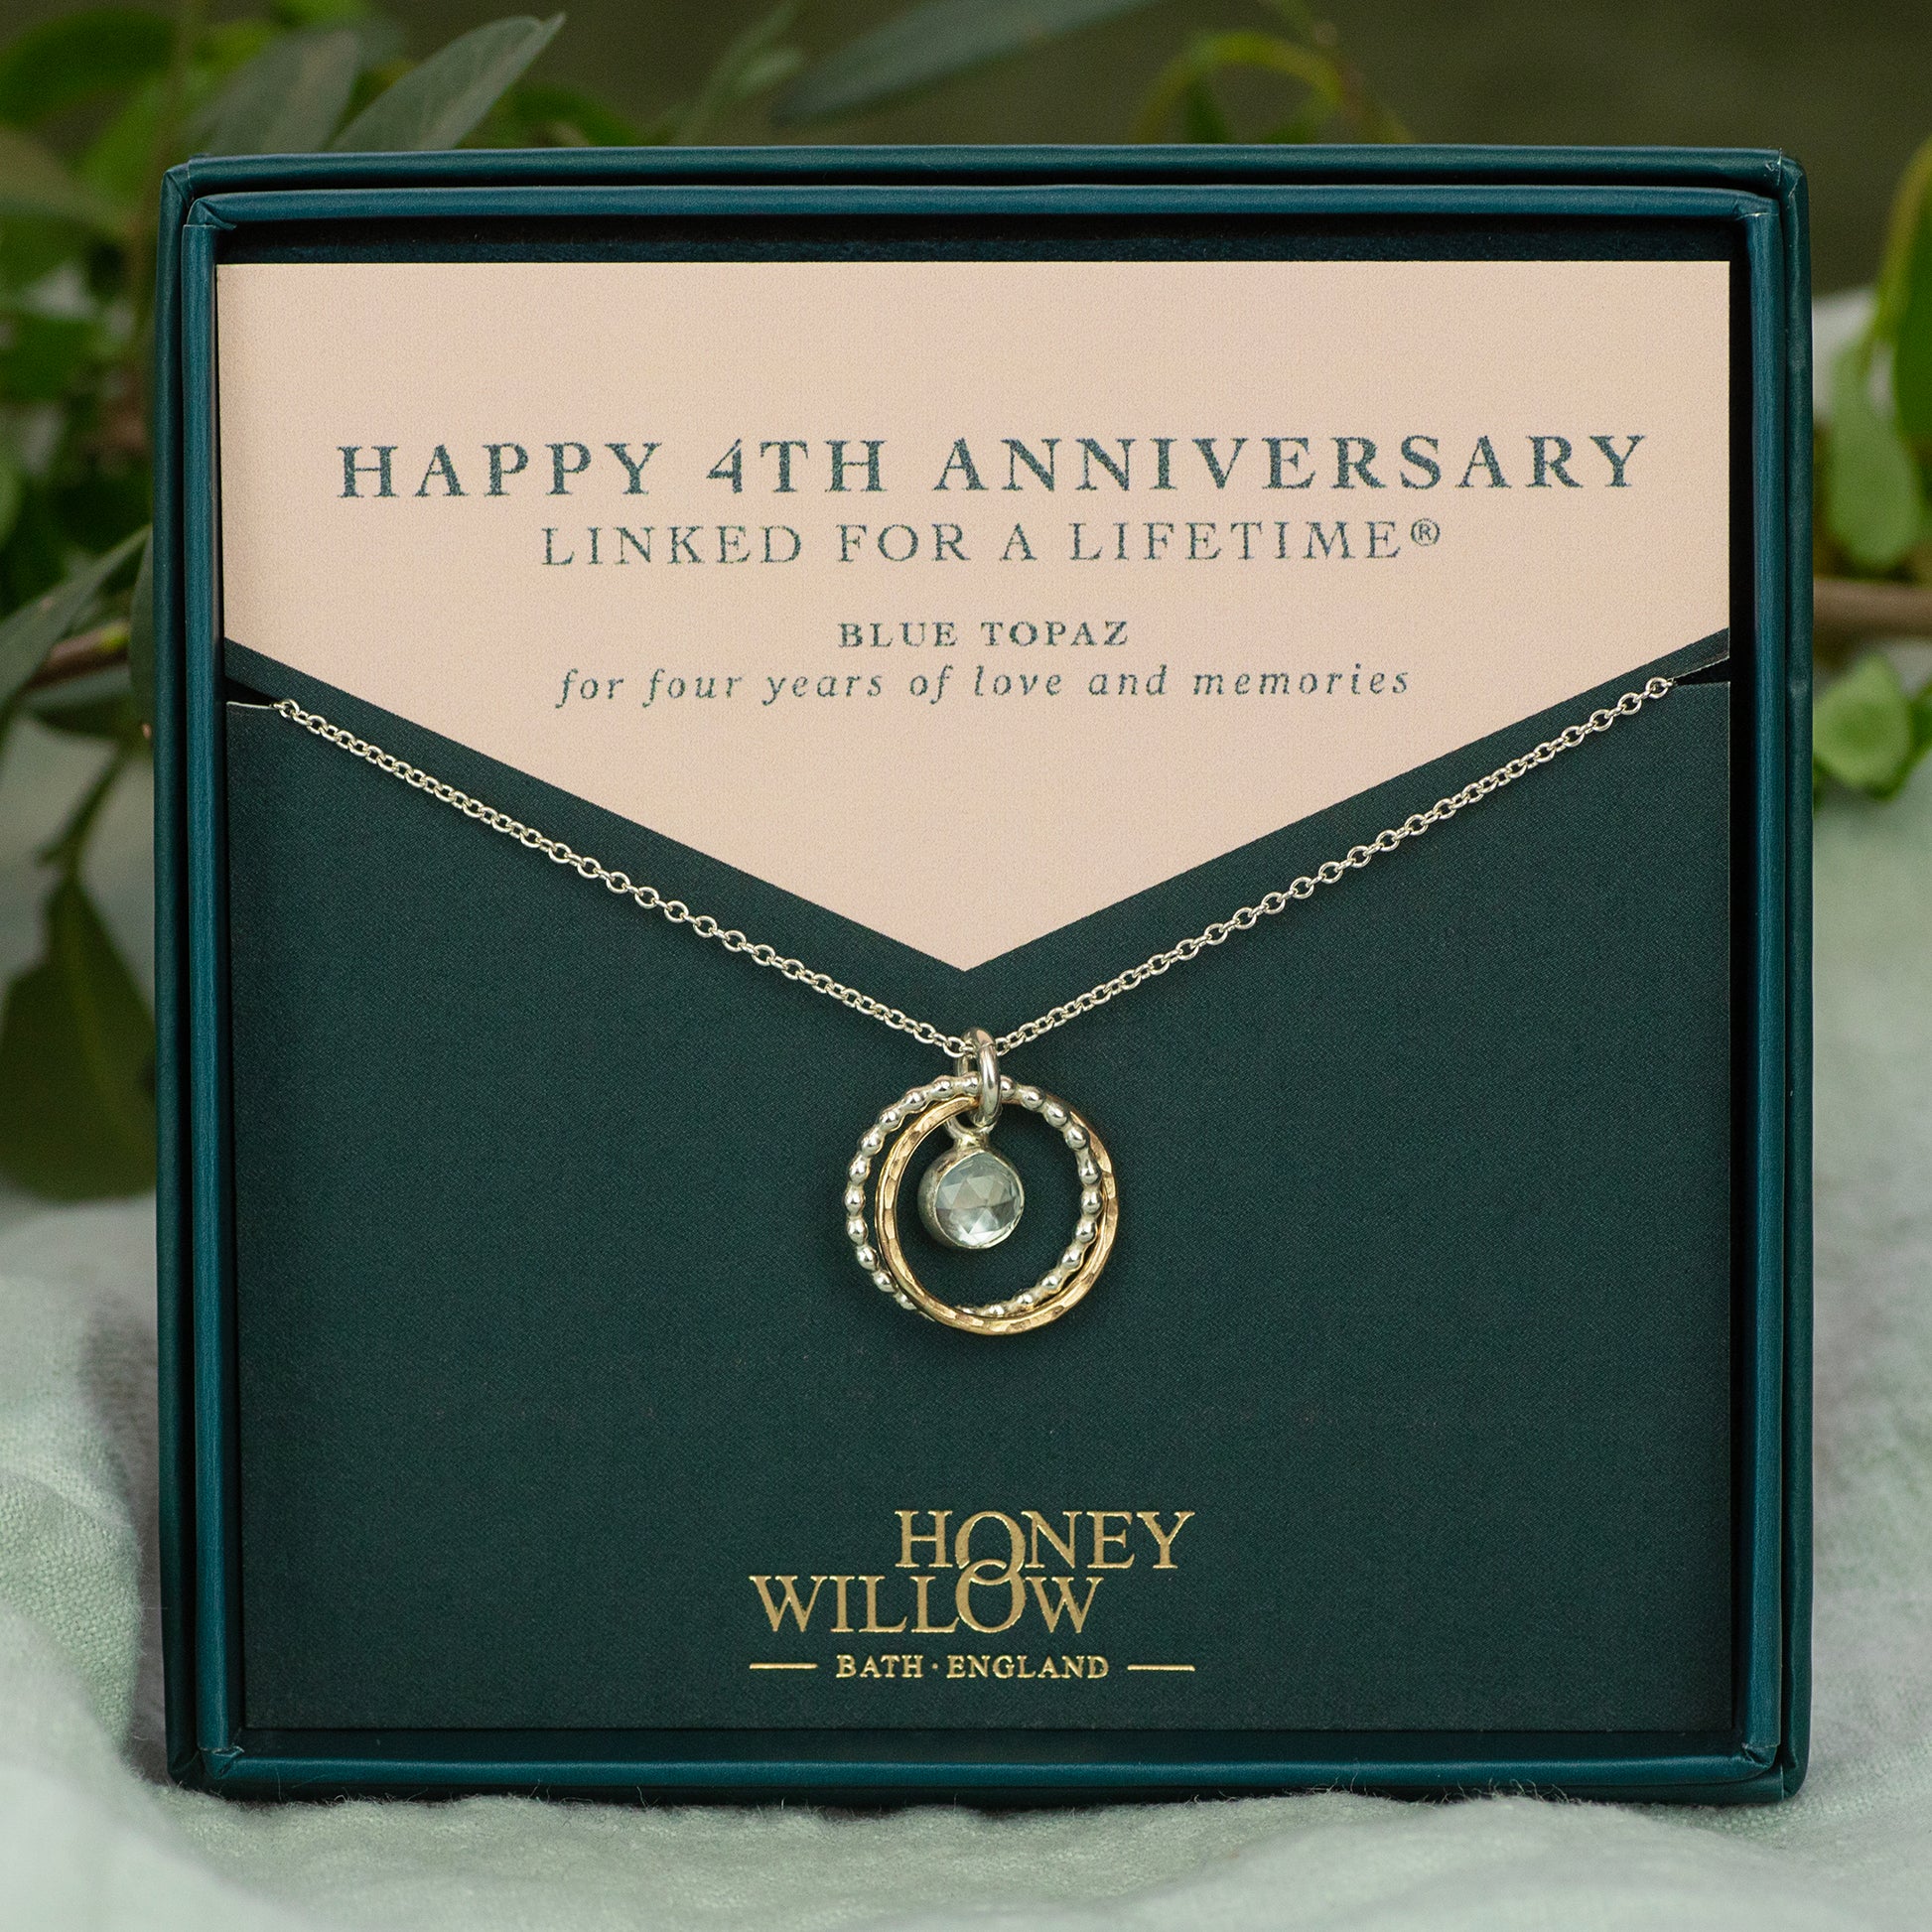 4th Anniversary Gift - Blue Topaz Anniversary Necklace - Silver & Gold